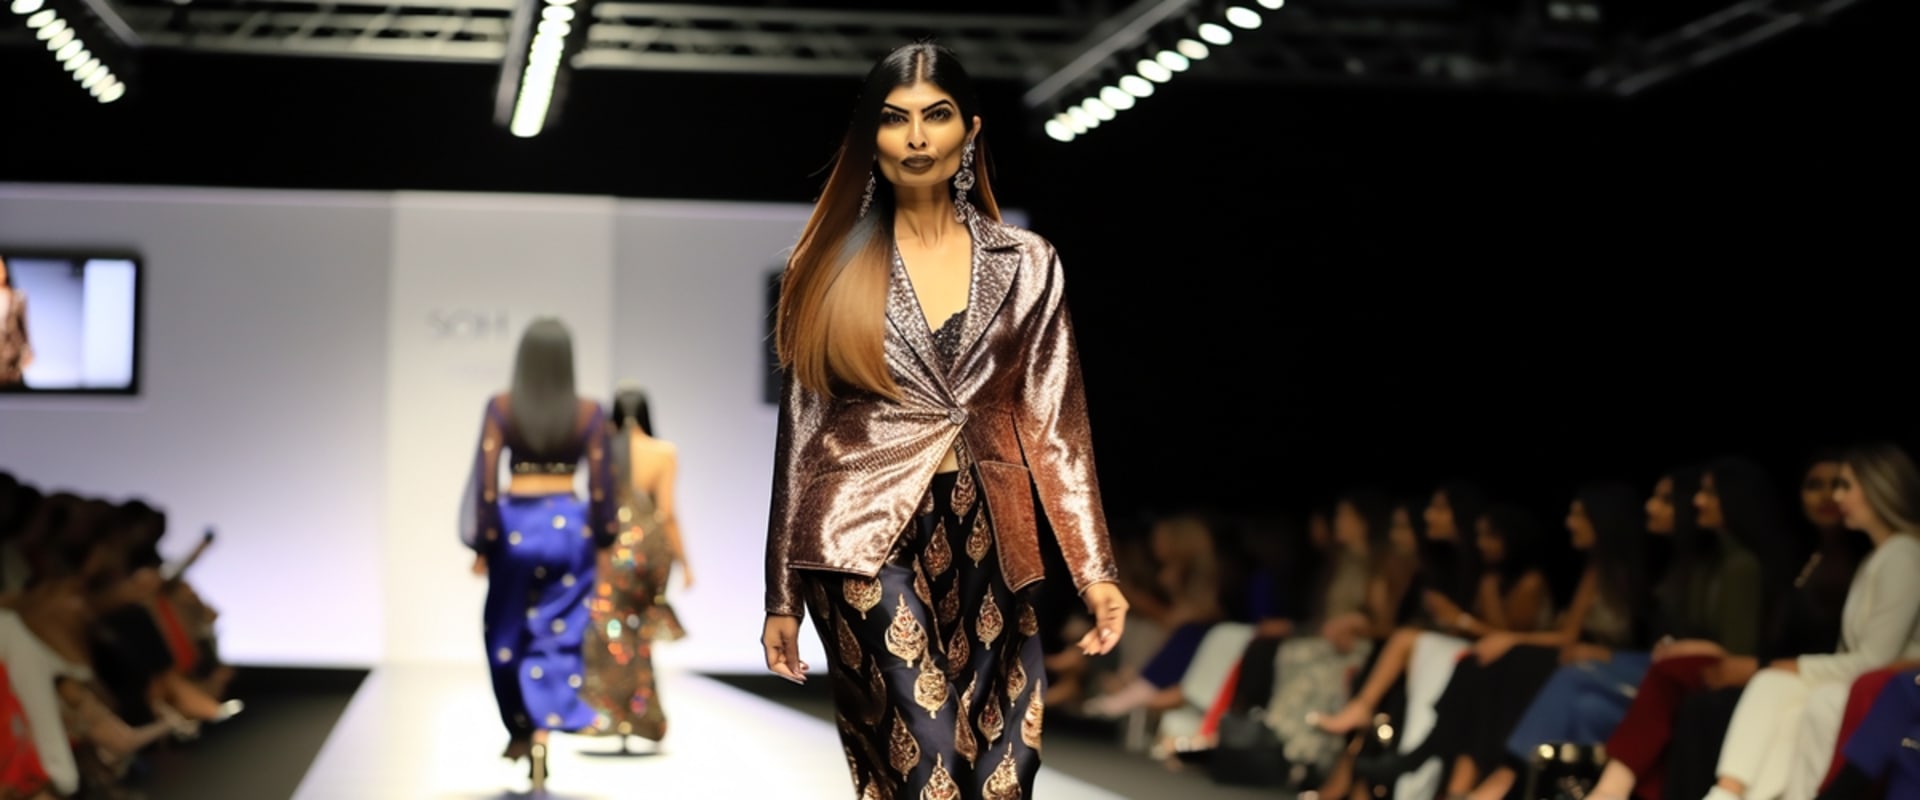 Top Modelling Agencies London: Your Gateway to the Fashion World